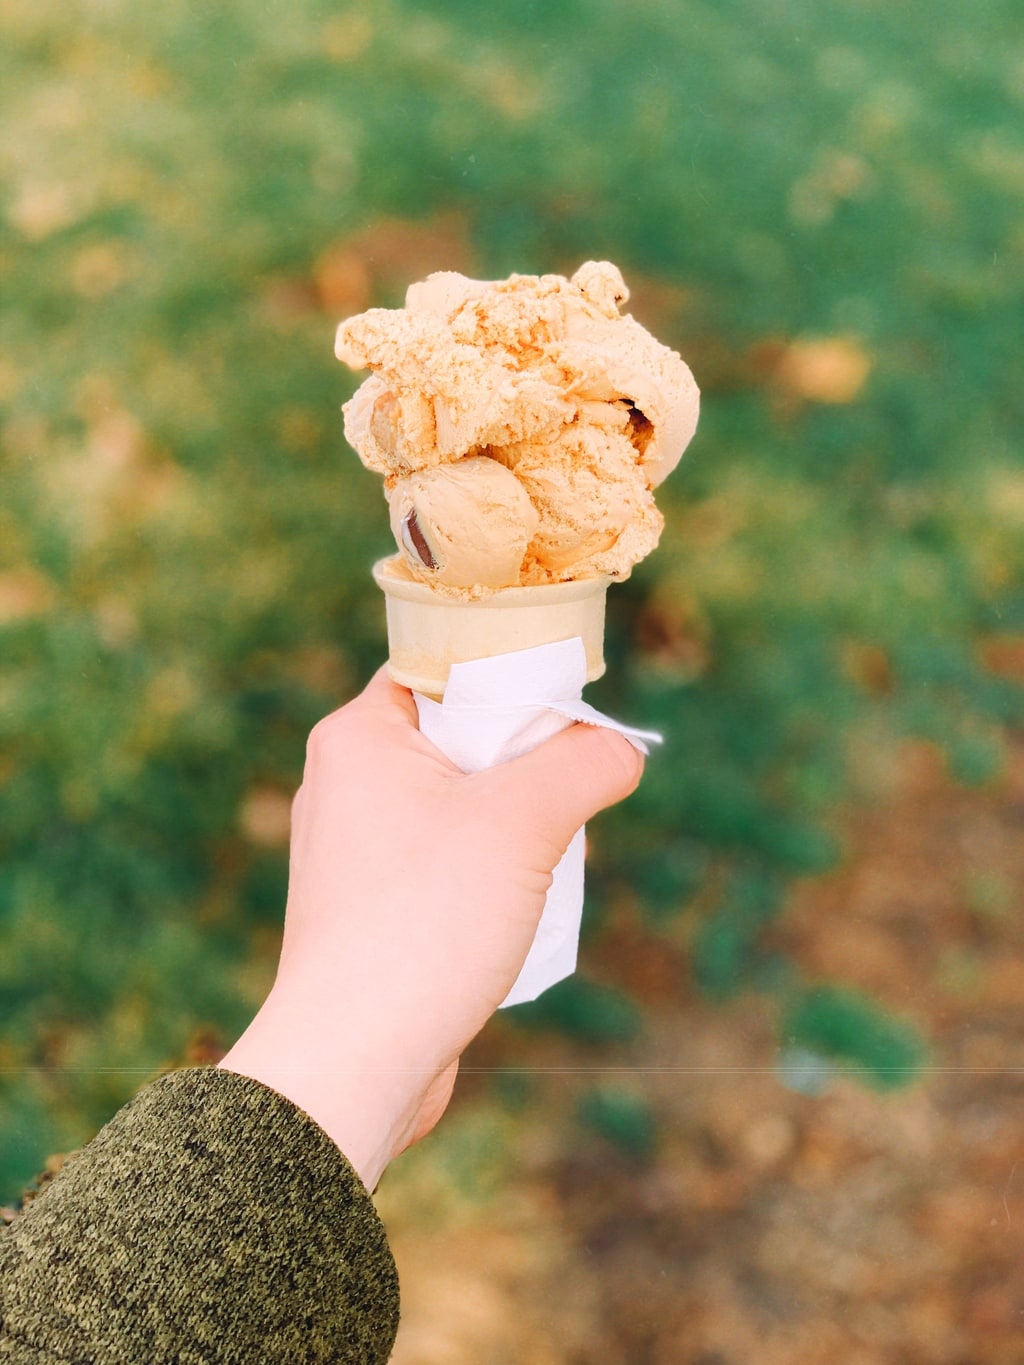 ice cream cone being held with grass in the background